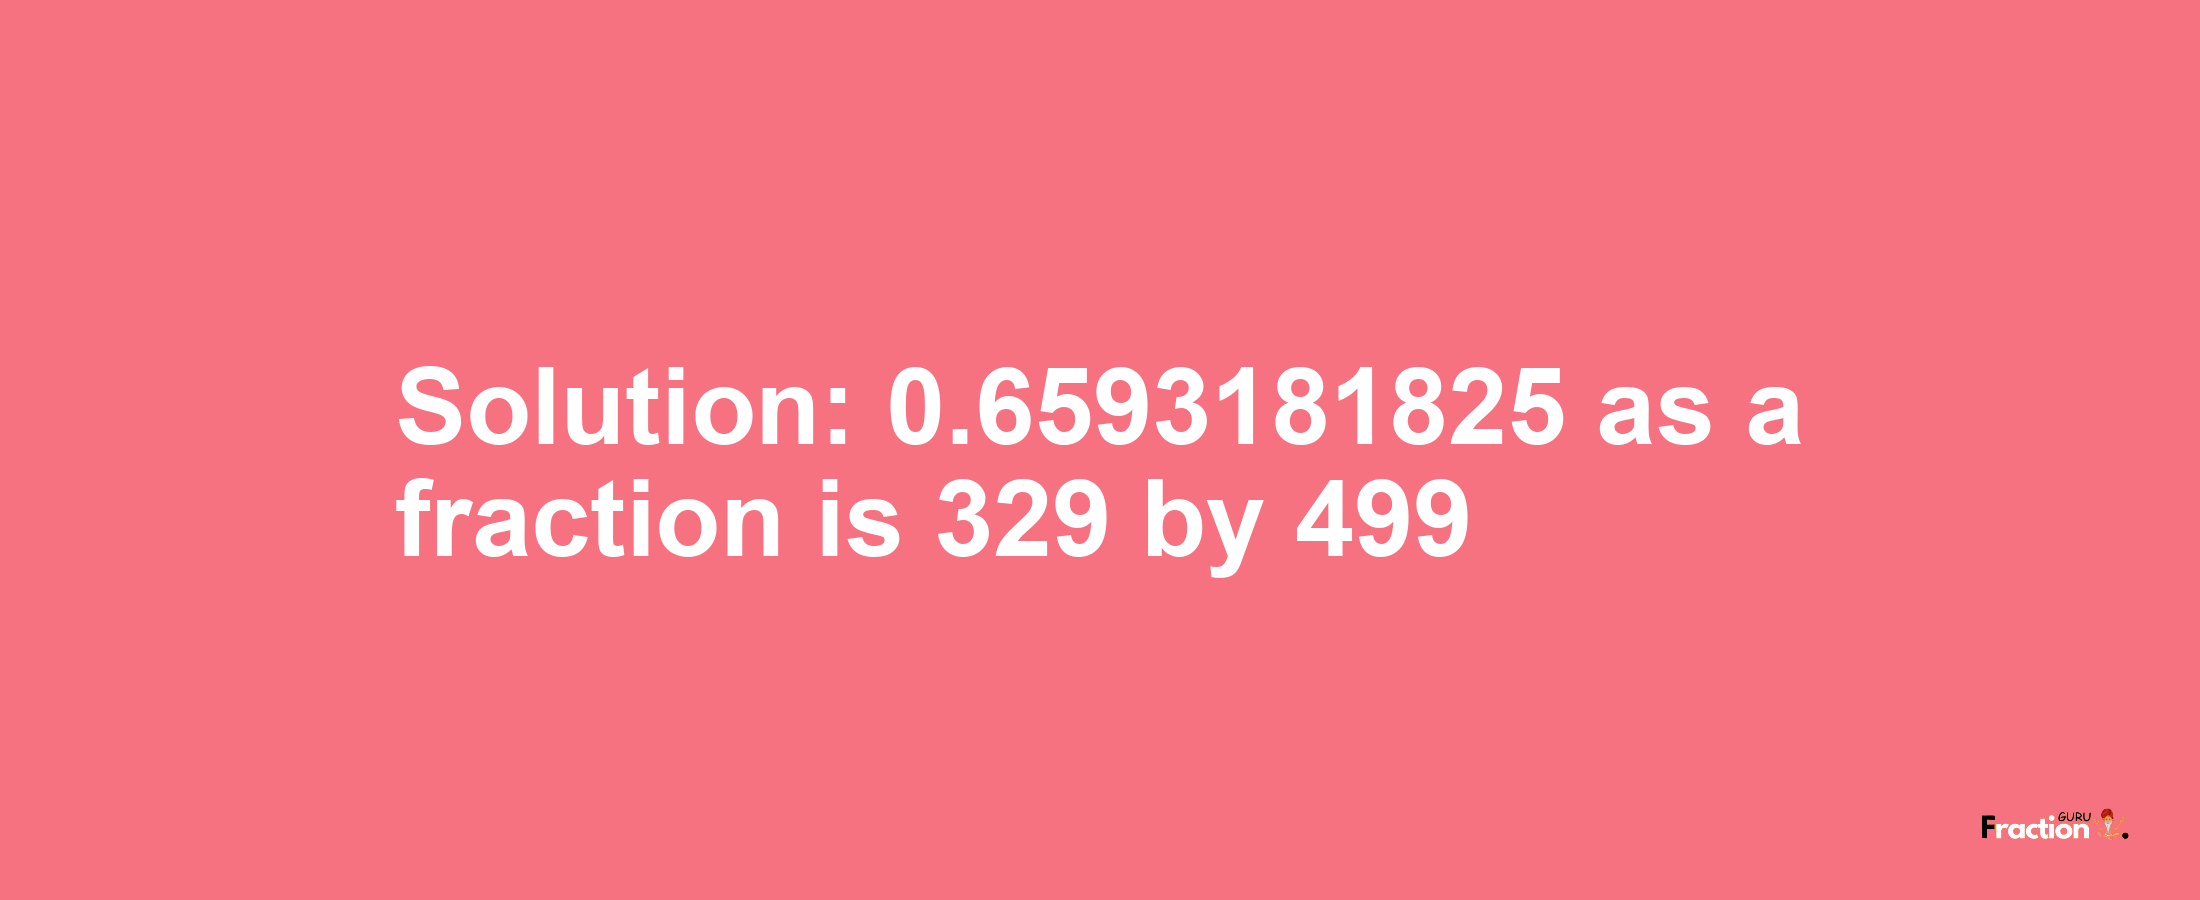 Solution:0.6593181825 as a fraction is 329/499